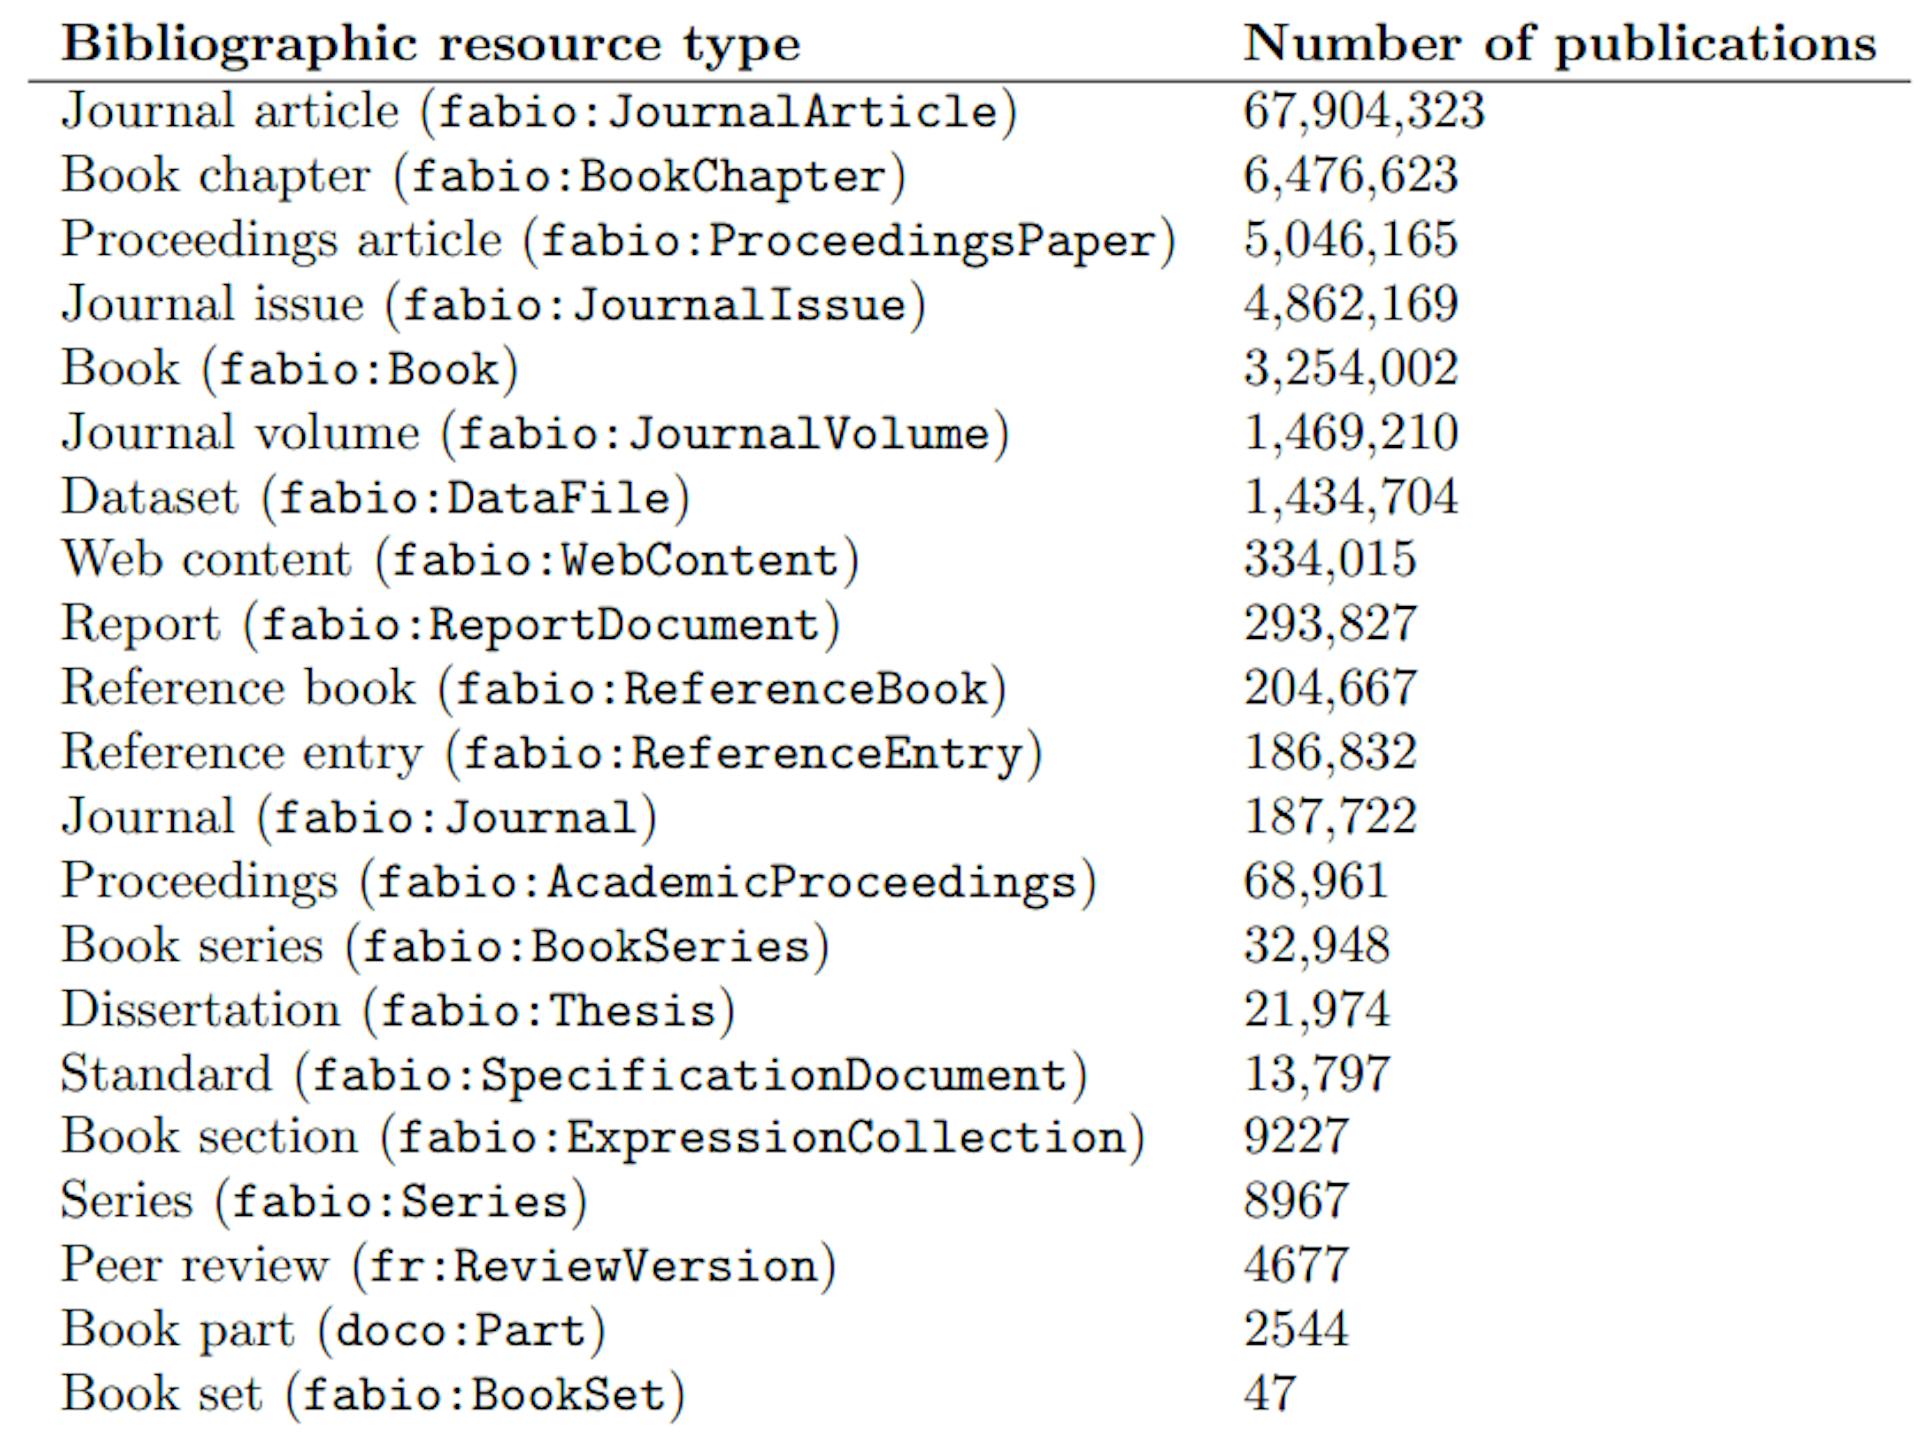 Table 5: All the bibliographic resource types involved in OpenCitations Meta, sorted by the number of publications of that type. The reference ontologies are FaBiO (http://purl.org/spar/fabio), DOCO (http://purl.org/spar/doco), and FAIR reviews (http://purl.org/spar/fr)